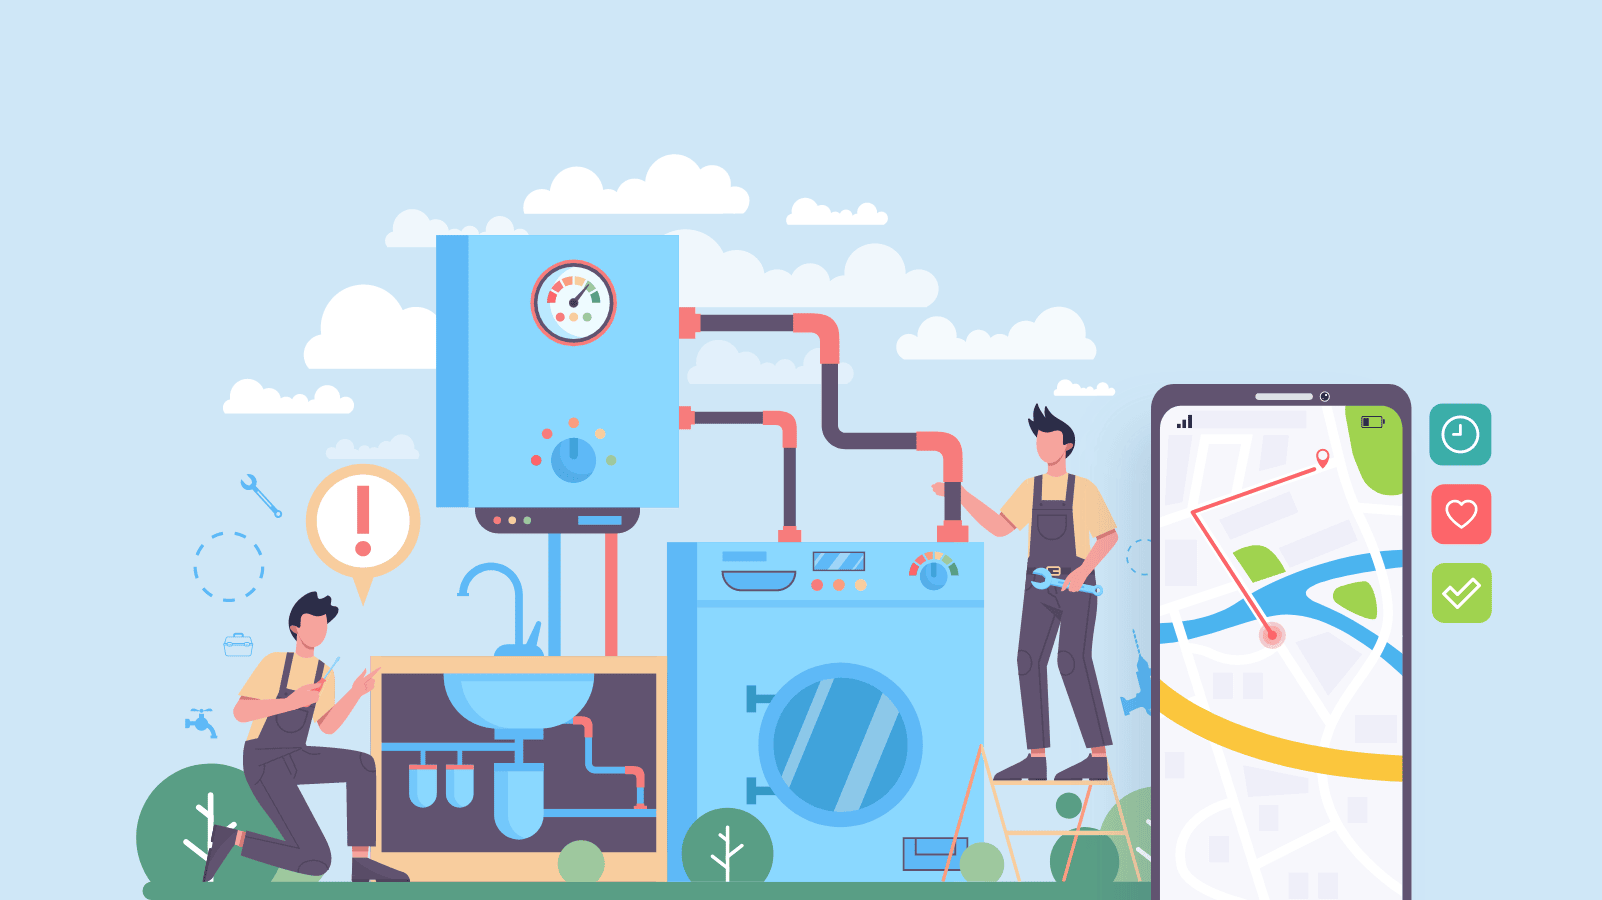 A hero image for the article "best plumbing business software" showing animated image of plumbers working and a mobile app